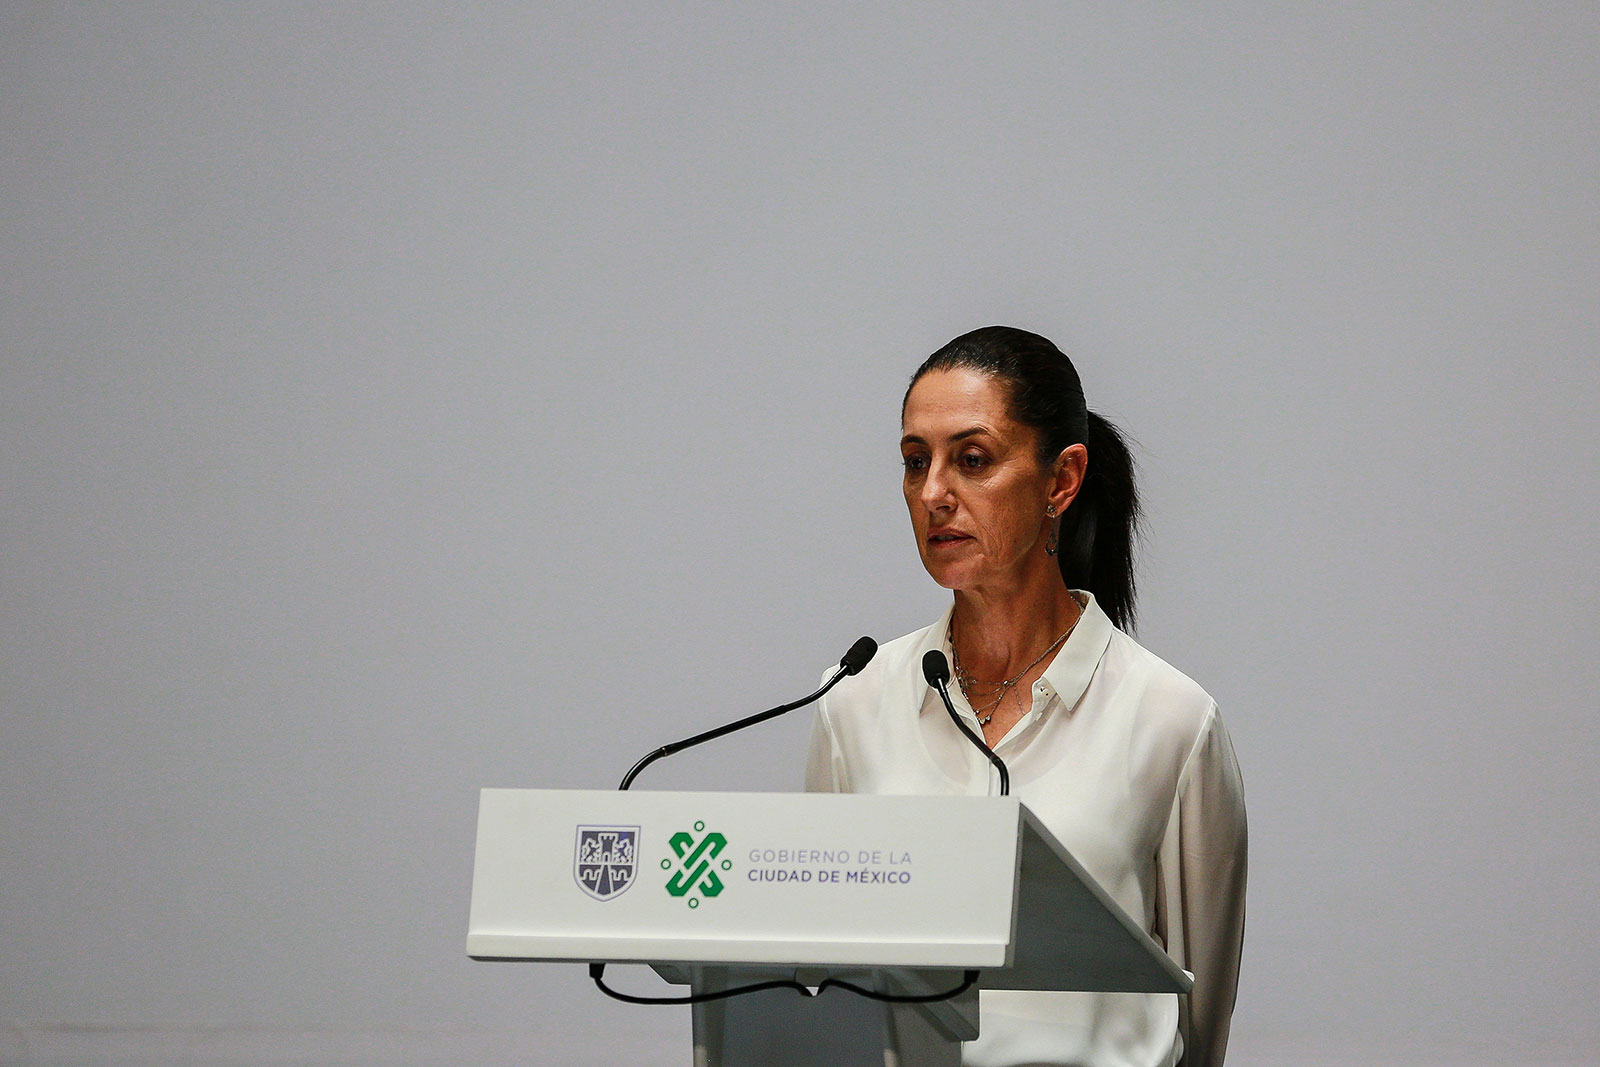 Mexico City Mayor Claudia Sheinbaum speaks during a press conference in March.